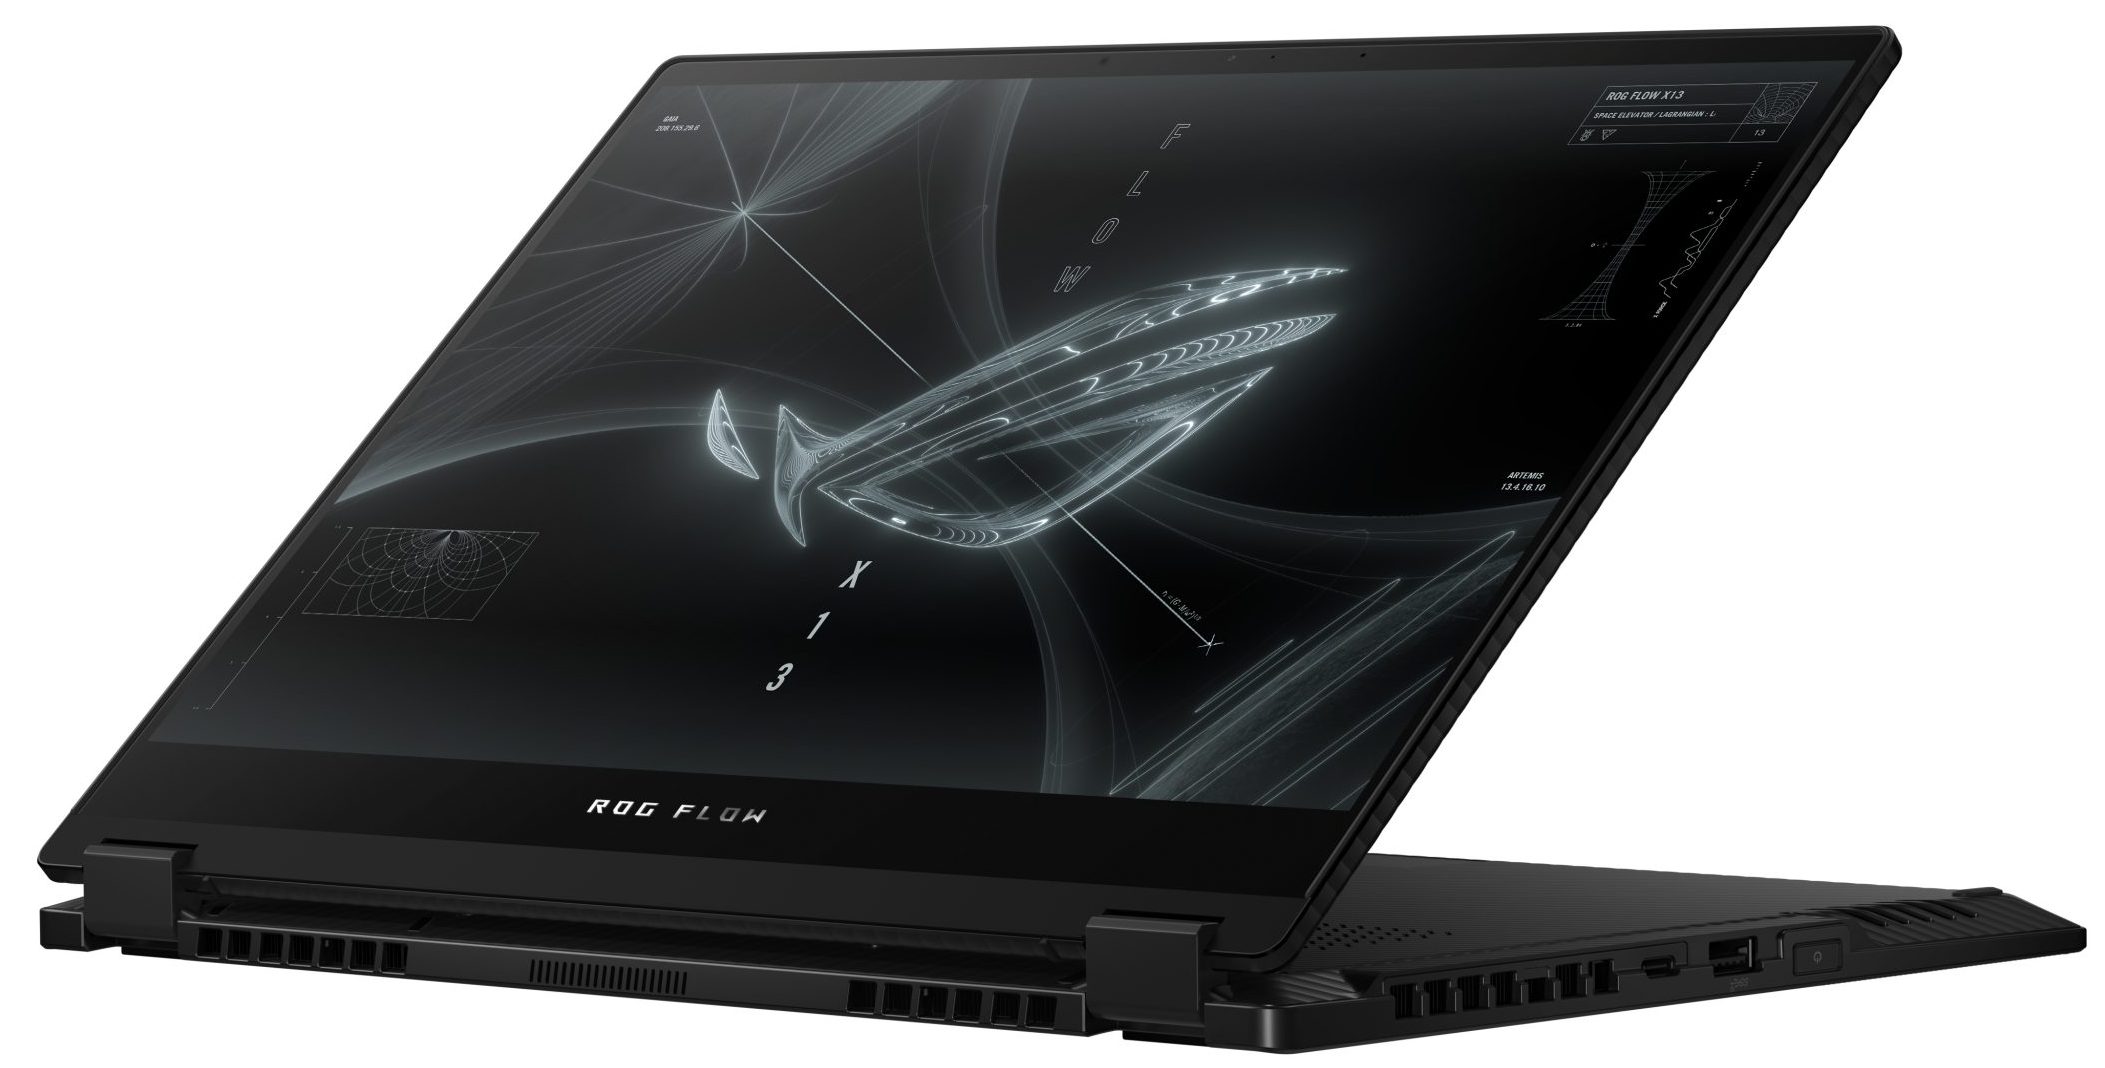 ASUS ROG Flow X13 (GV301 / PV301) - Specs, Tests, and Prices